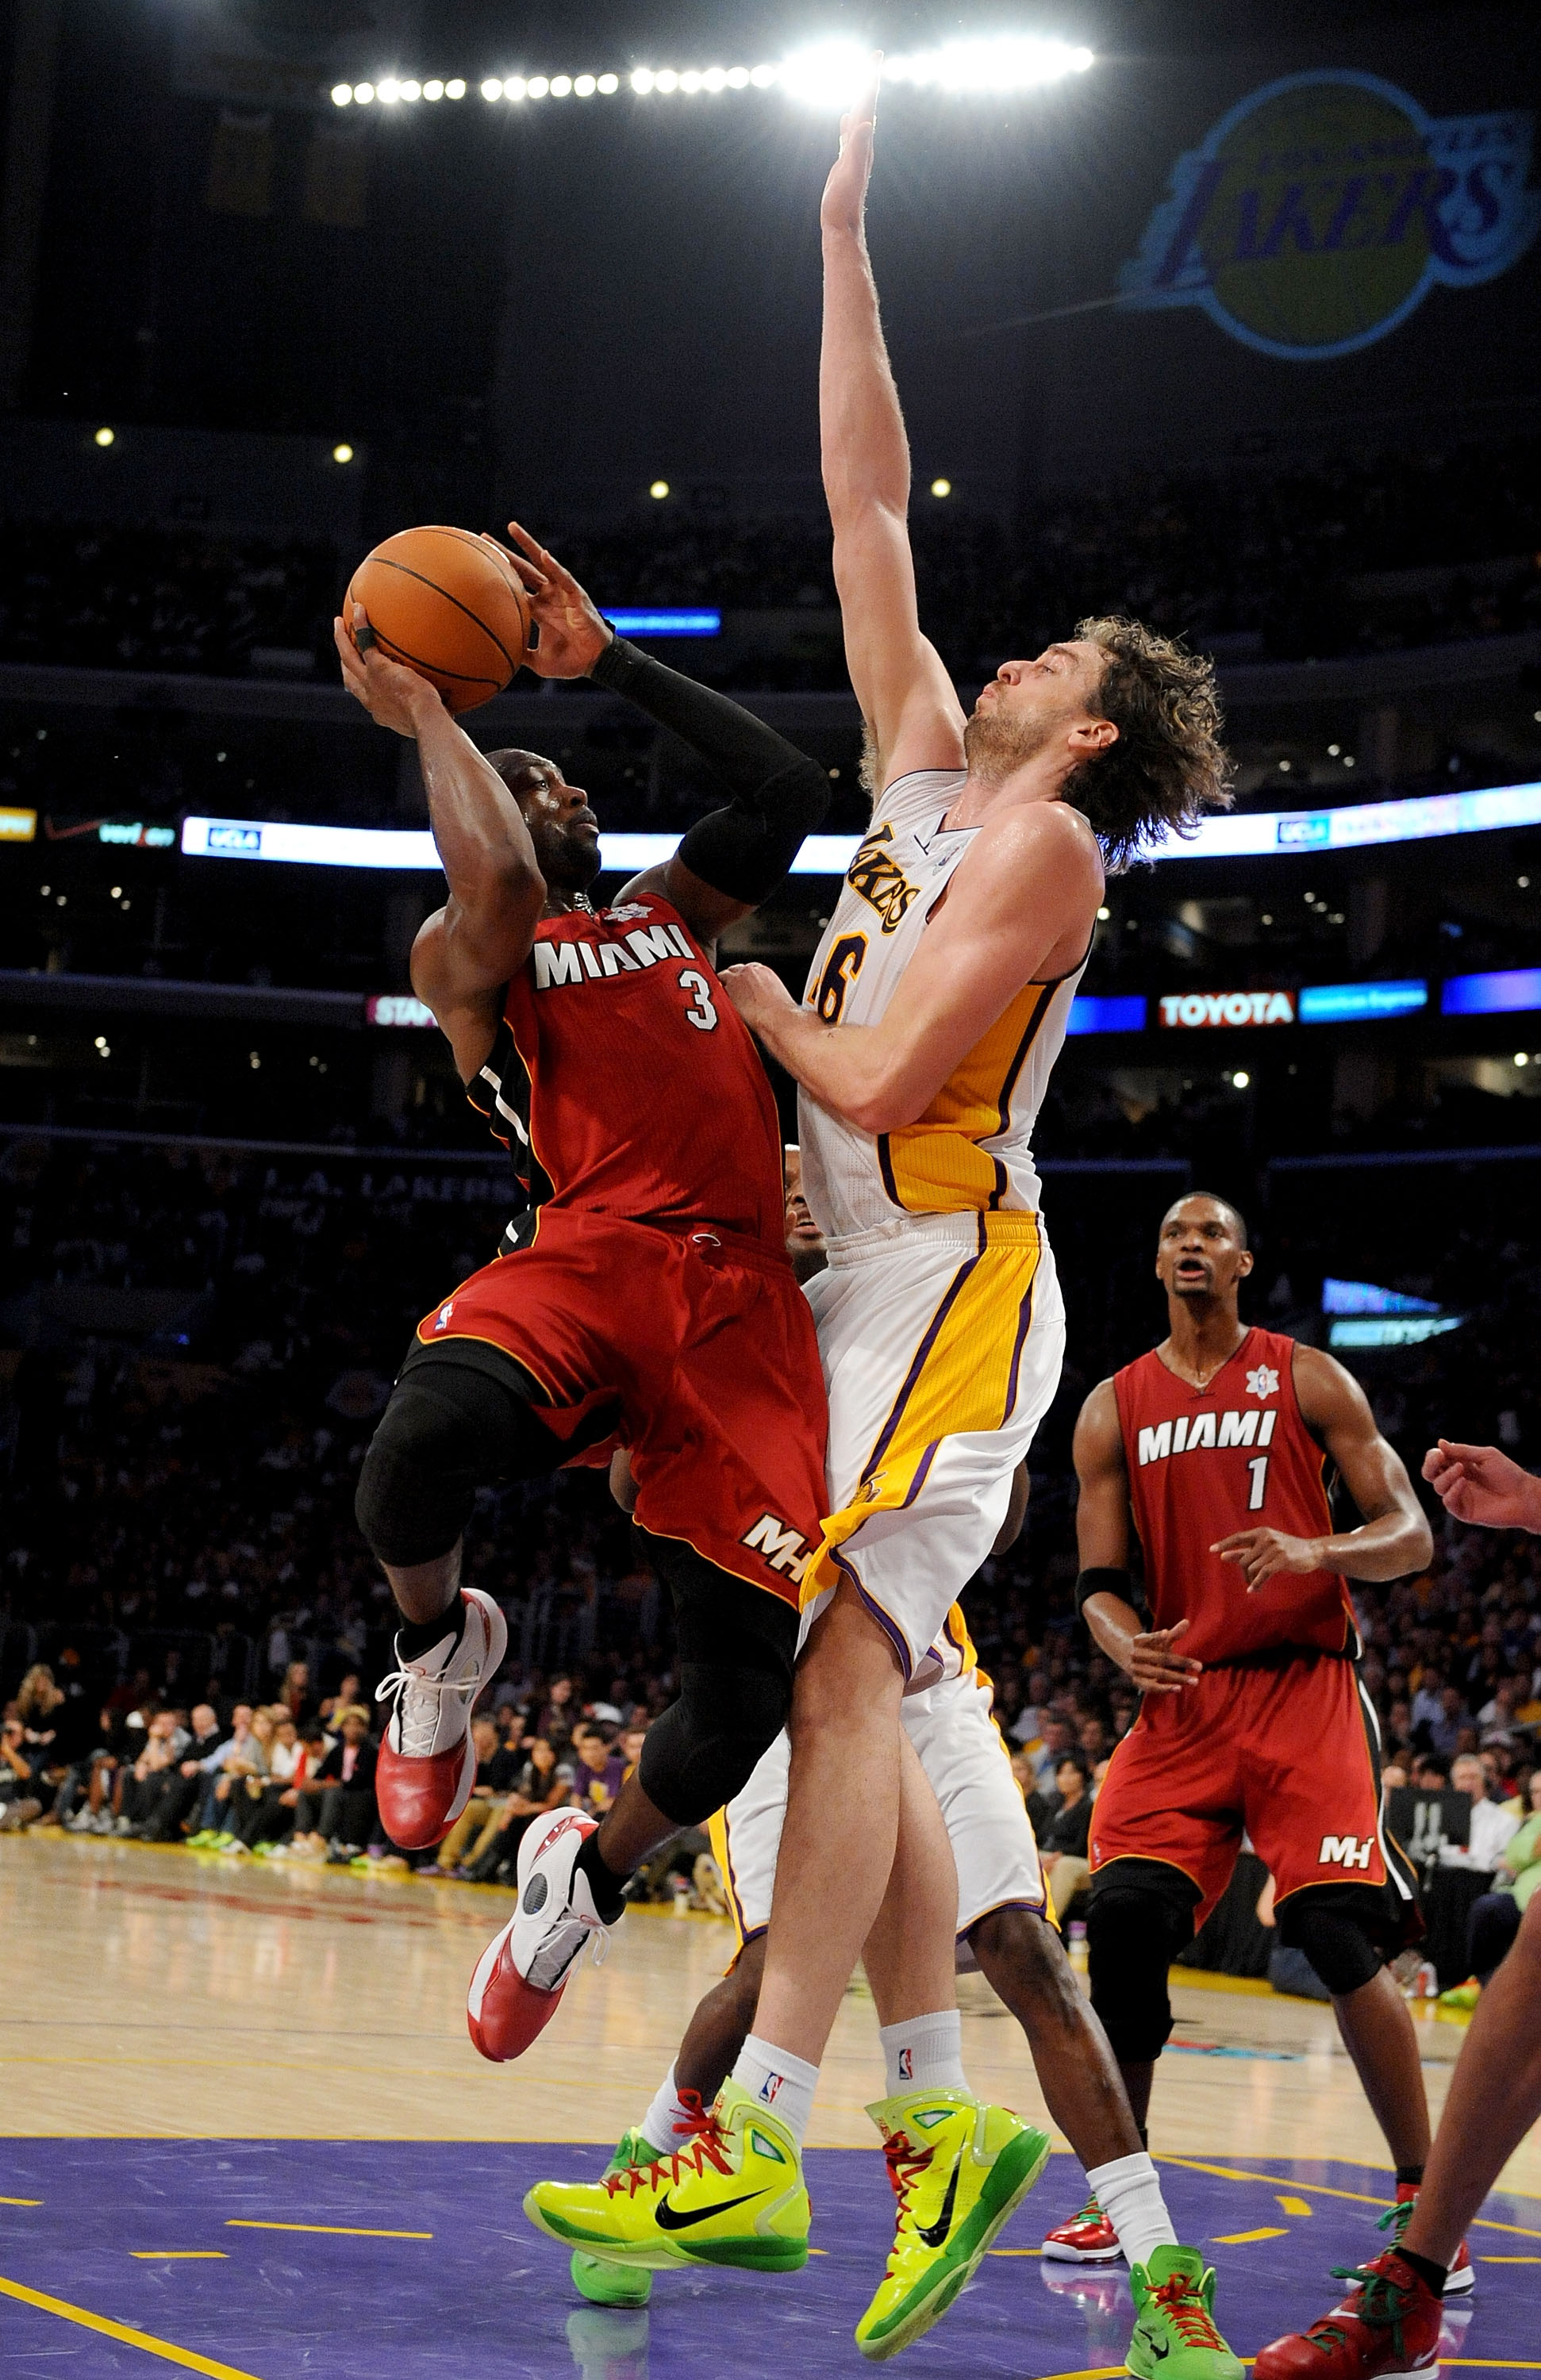 LOS ANGELES, CA - DECEMBER 25:  Dwayne Wade #3 of the Miami Heat puts a shot up against Pau Gasol #16 of the Los Angeles Lakers at Staples Center on December 25, 2010 in Los Angeles, California. NOTE TO USER: User expressly acknowledges and agrees that, b